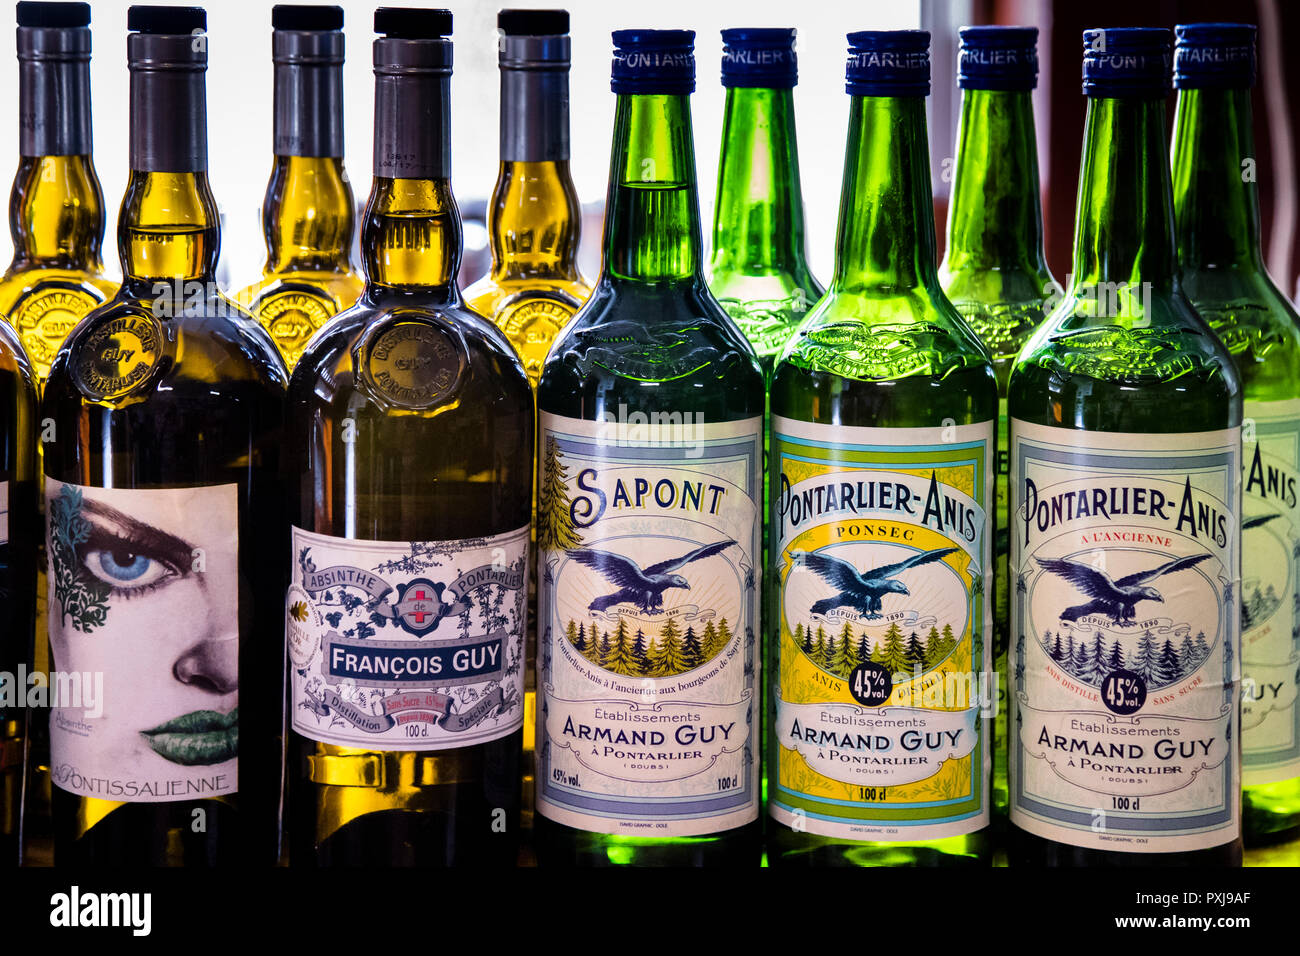 Bottles from Absinthe distillery Armand Guy in Portarlier, France Stock Photo